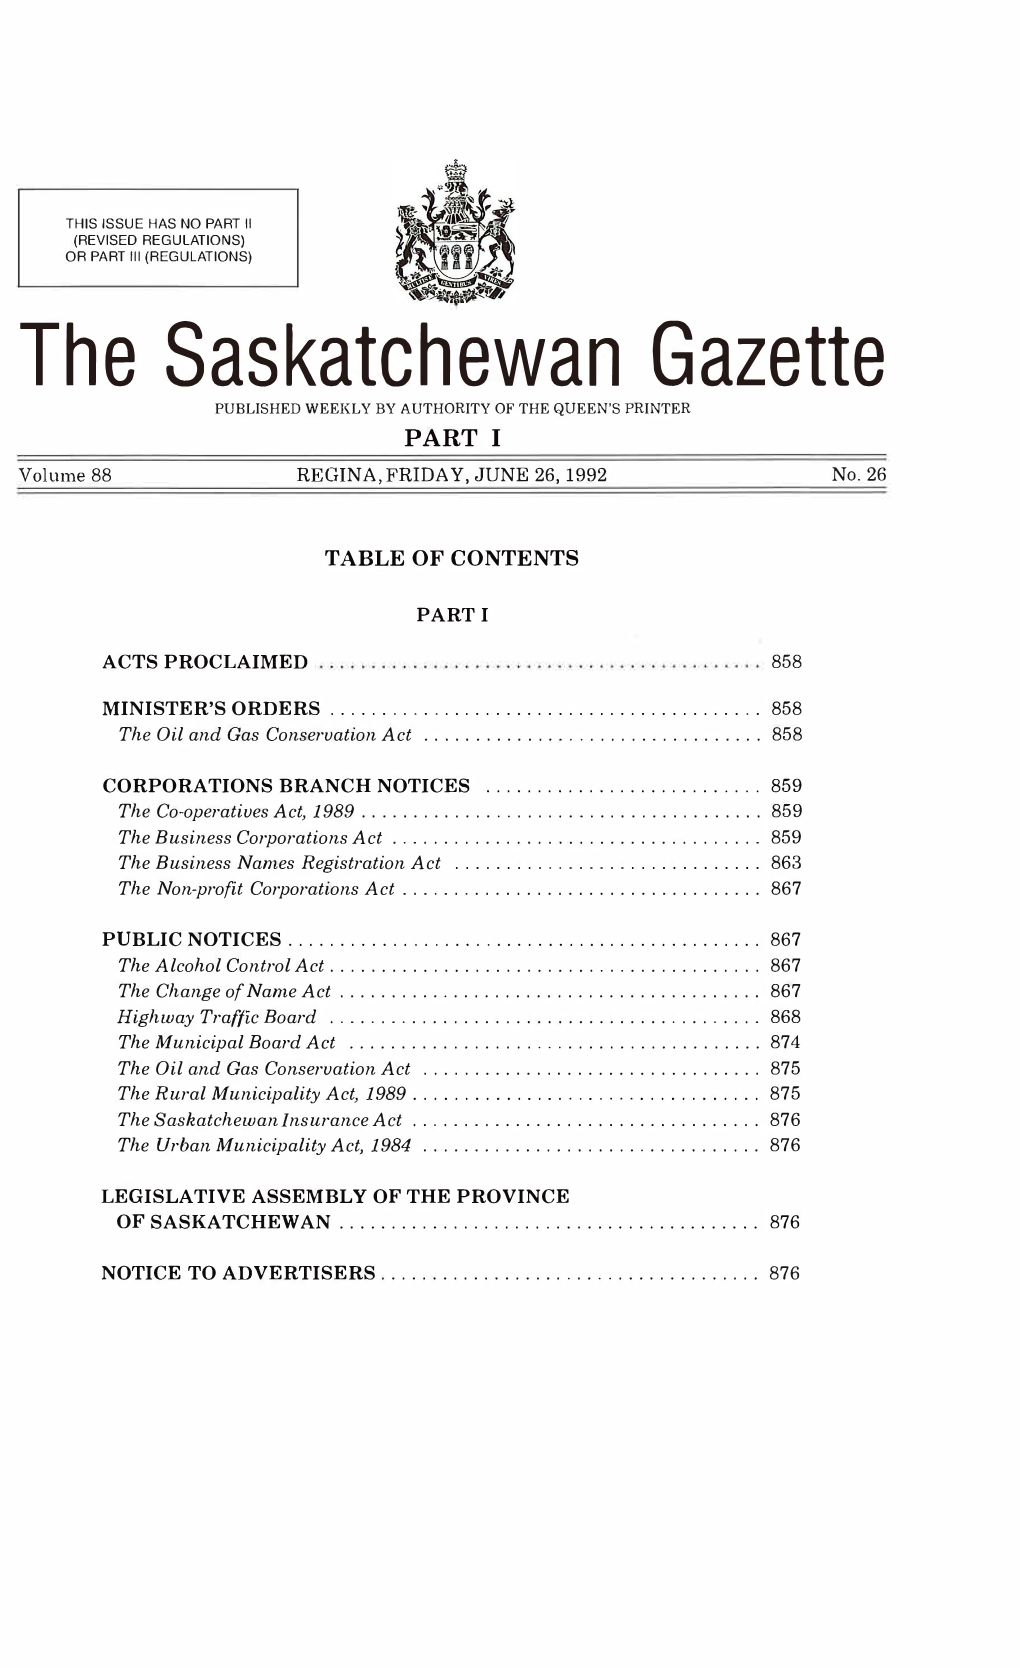 I the Saskatchewan Gazette PUBLISHED WEEKLY by AUTHORITY of the QUEEN's PRINTER PART I Volume 88 REGINA, FRIDAY, JUNE 26, 1992 No